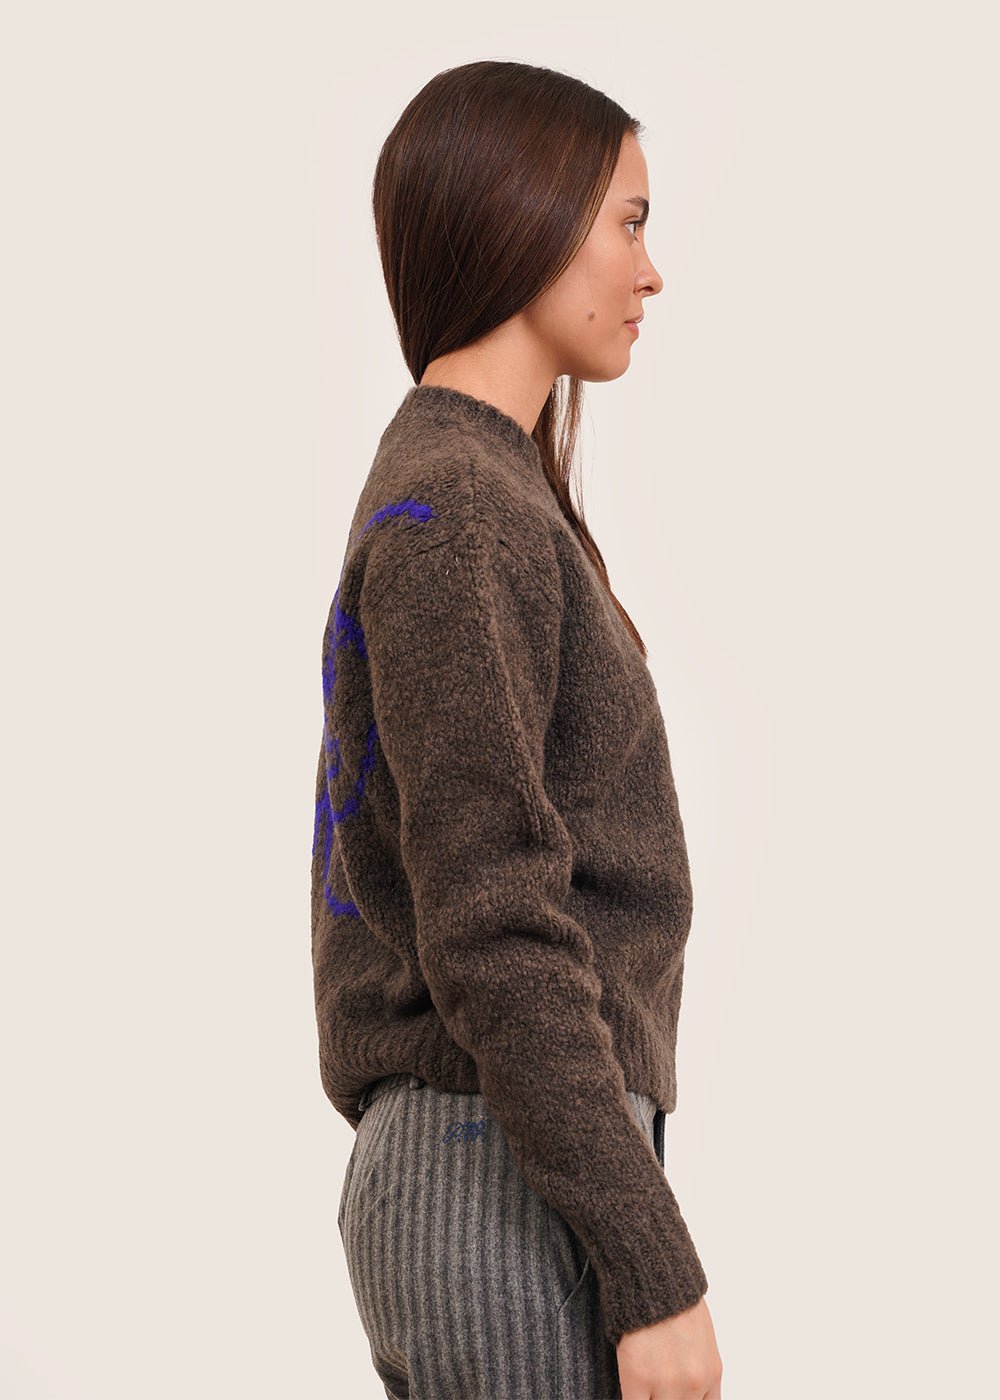 Paloma Wool Cuc Sport Sweater - New Classics Studios Sustainable Ethical Fashion Canada